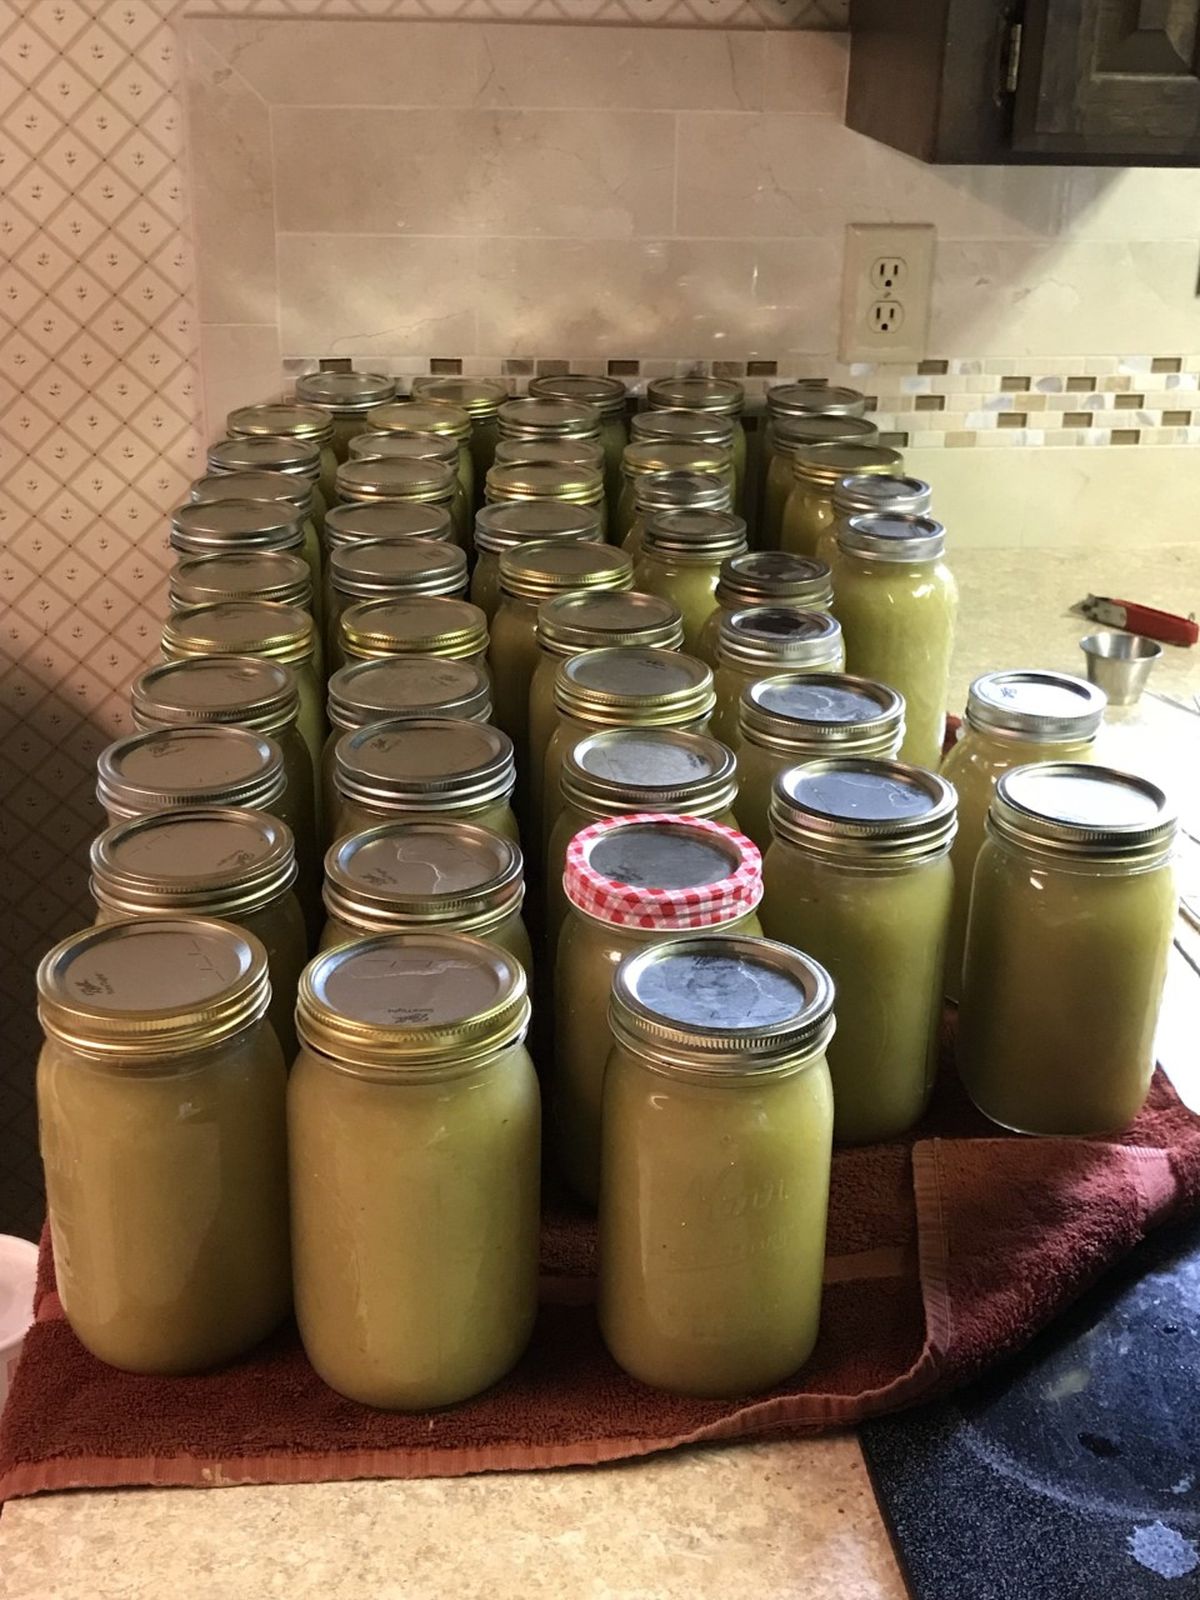 In the Pettit kitchen, some of last year’s apple harvest that was turned into applesauce is long since consumed. Jars are empty, awaiting this year’s canning process.  (Stefanie Pettit/For The Spokesman-Review)